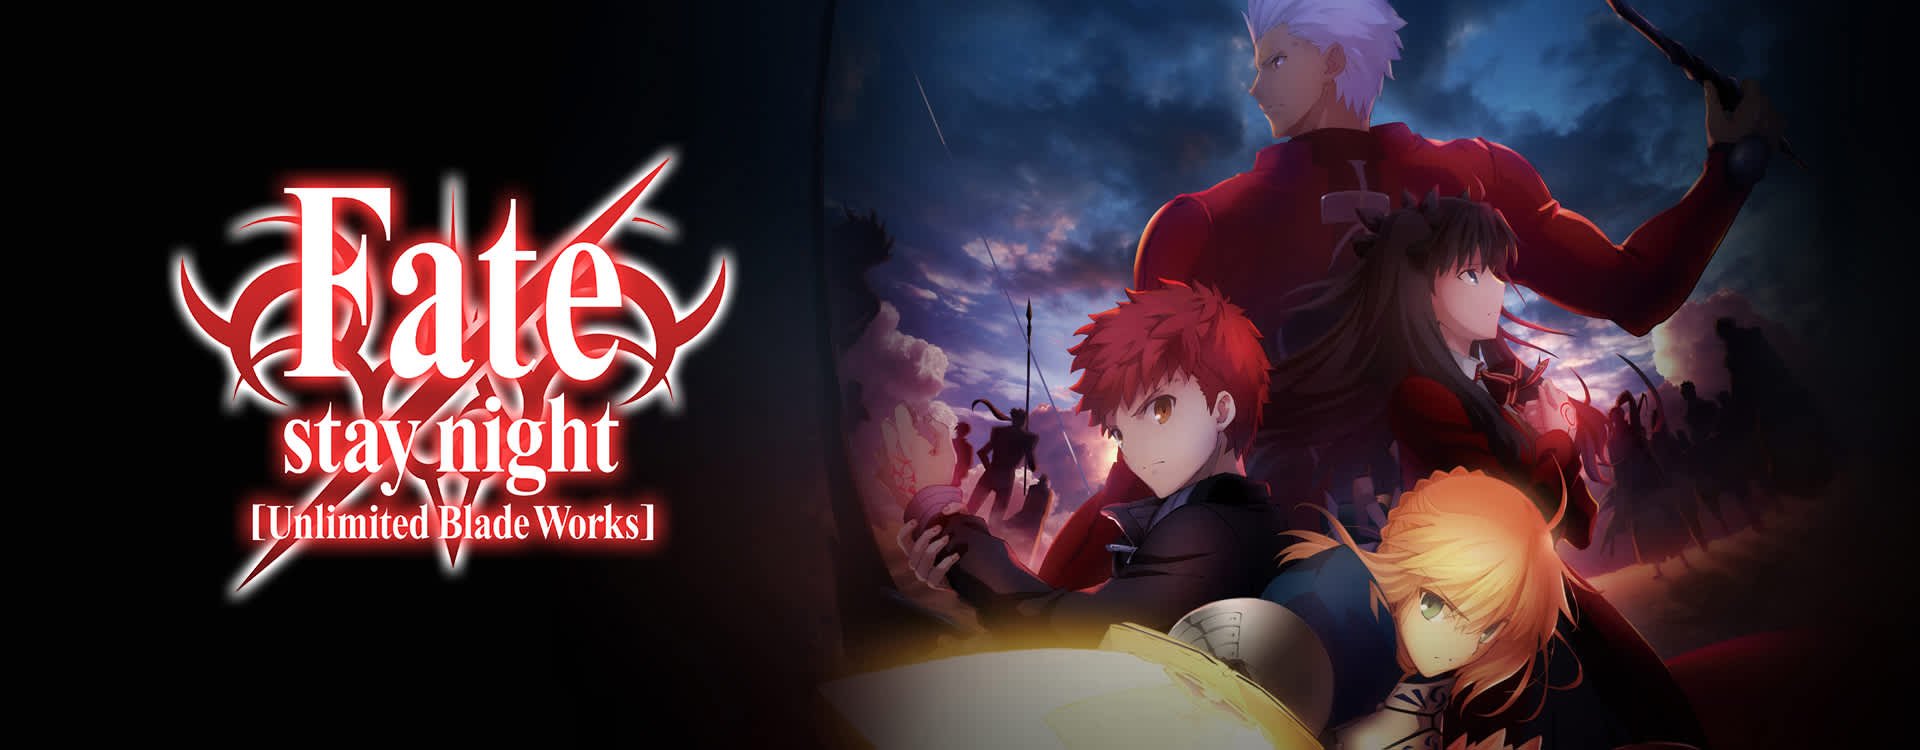 Fate/Stay Night Unlimited Blade Works, Fate/Zero, Gravitation and Junjo  Romantica to Stream on Funimation Now UK • Anime UK News